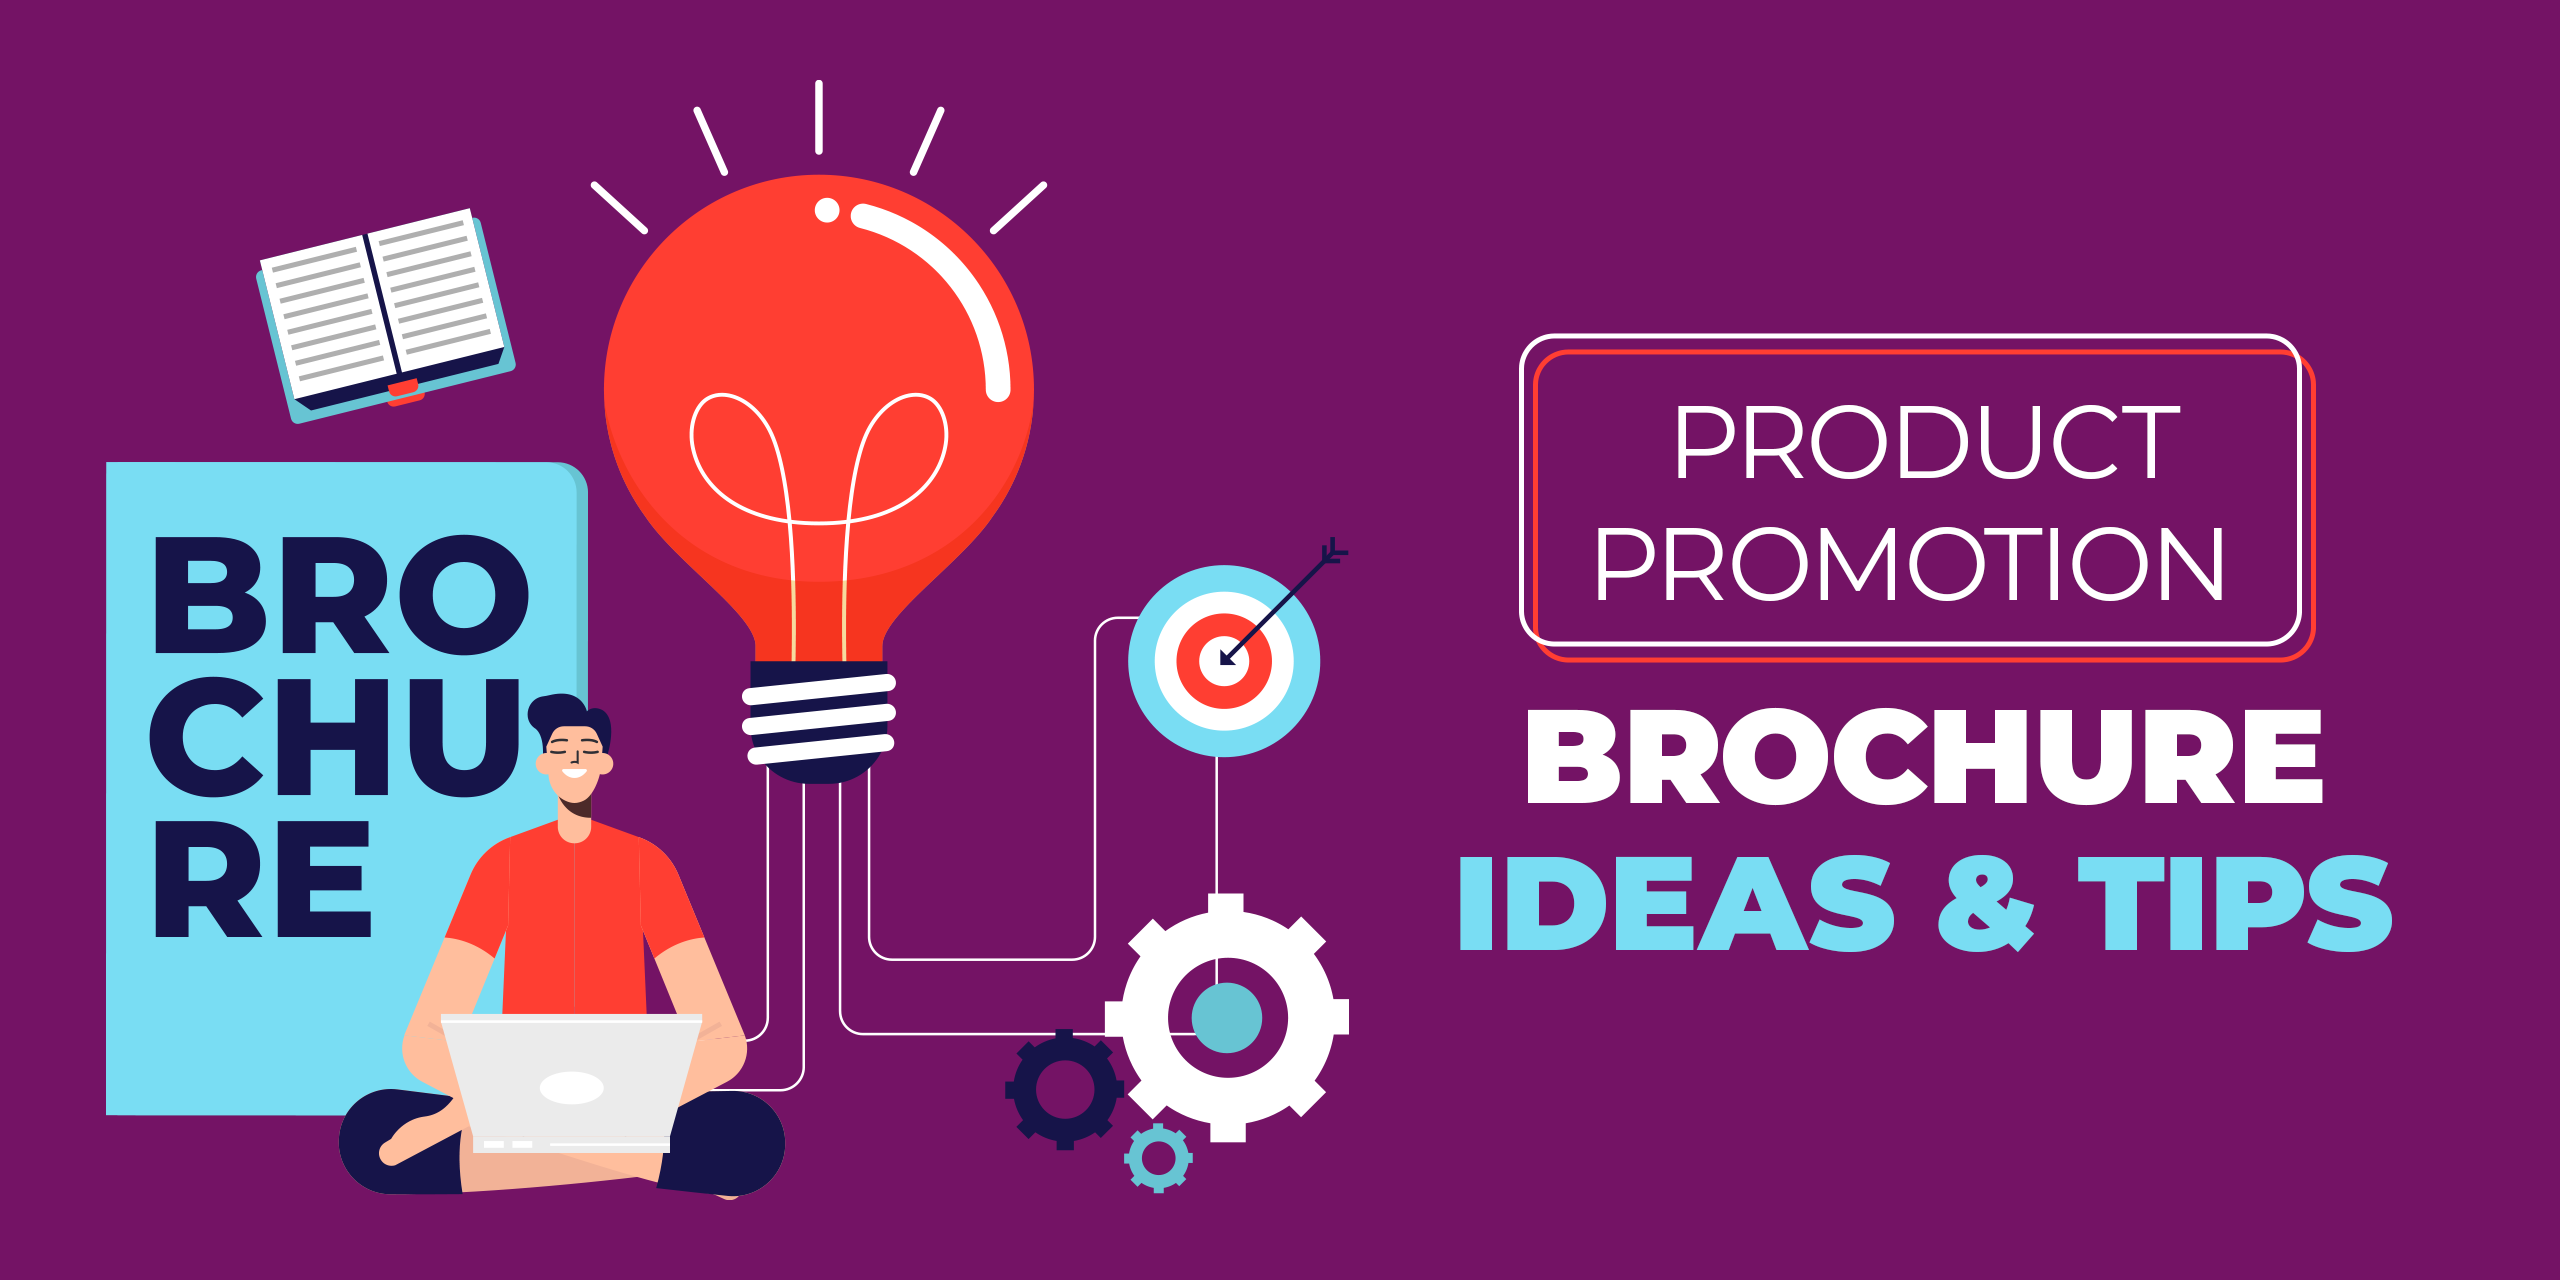 Product promotion brochure ideas & tips